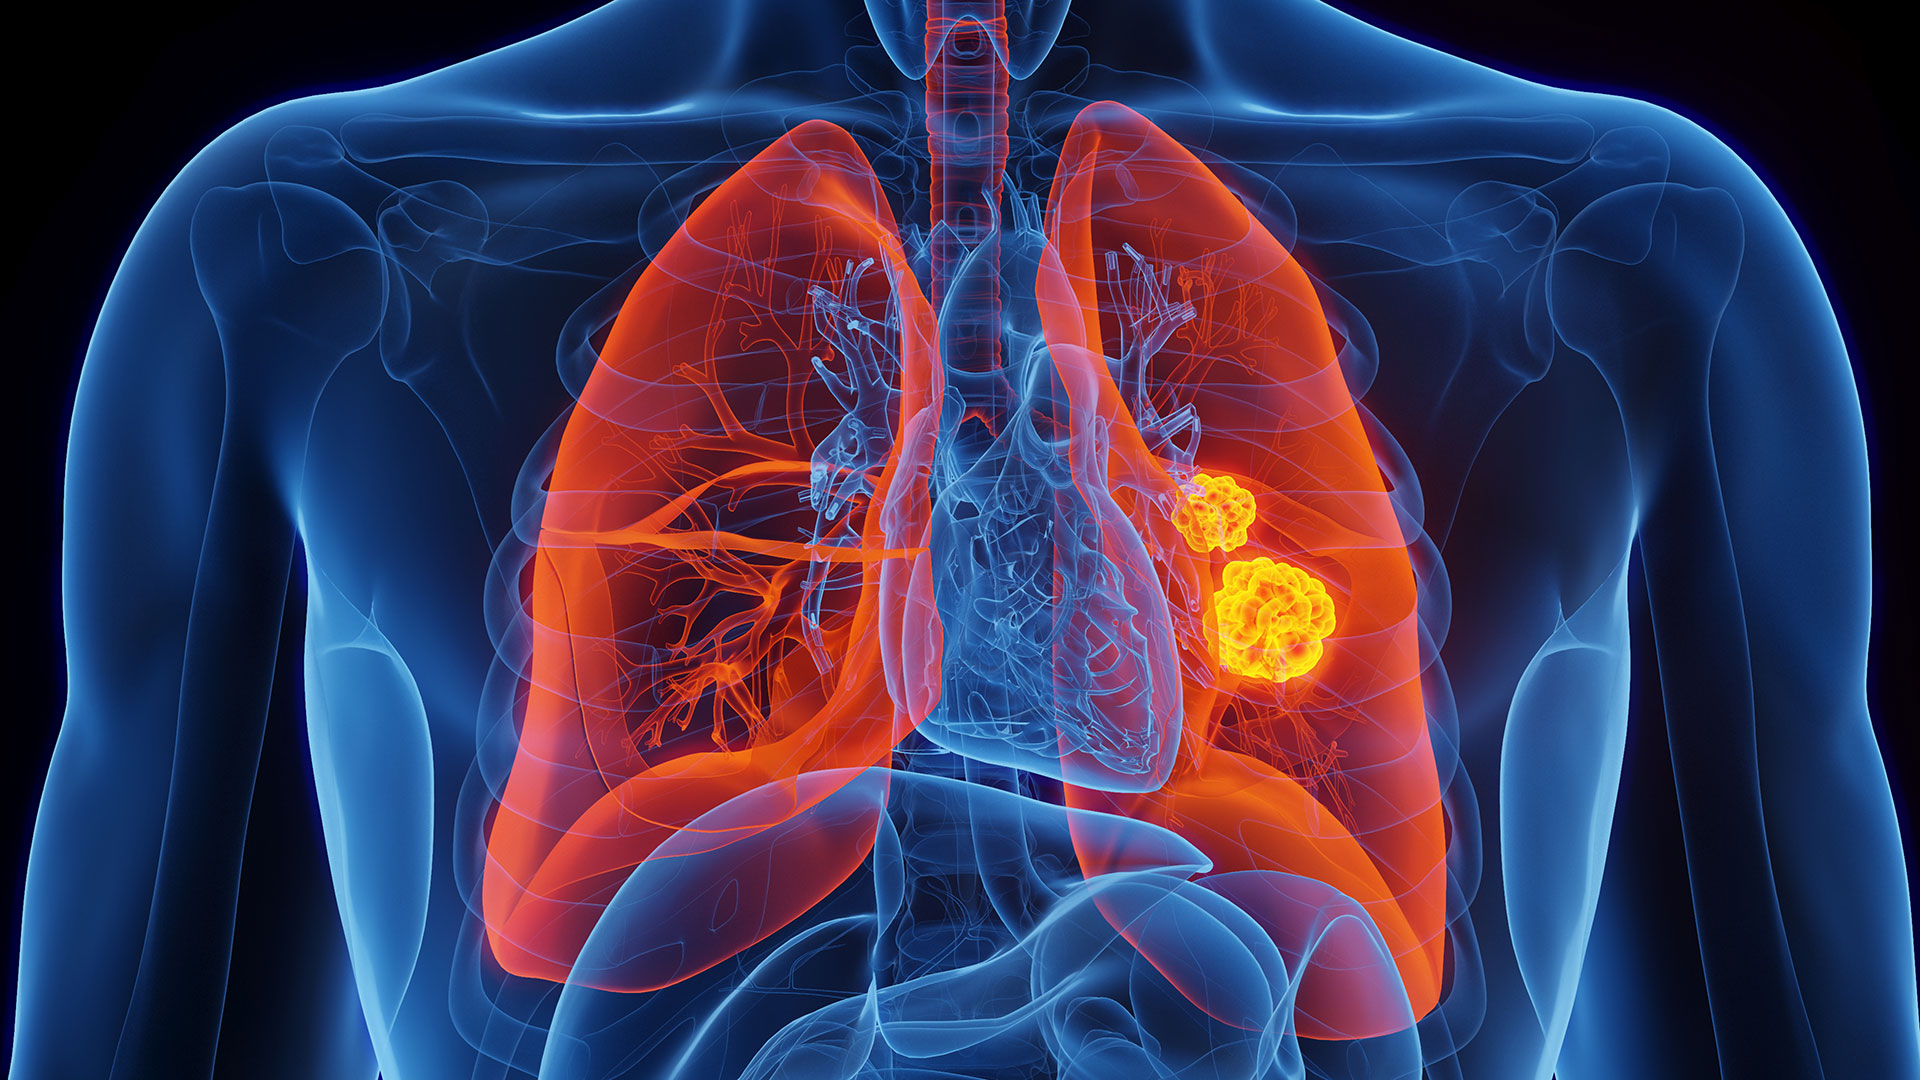 Surgery Can Help Patients with “Oligometastatic” Lung Cancer Live Longer